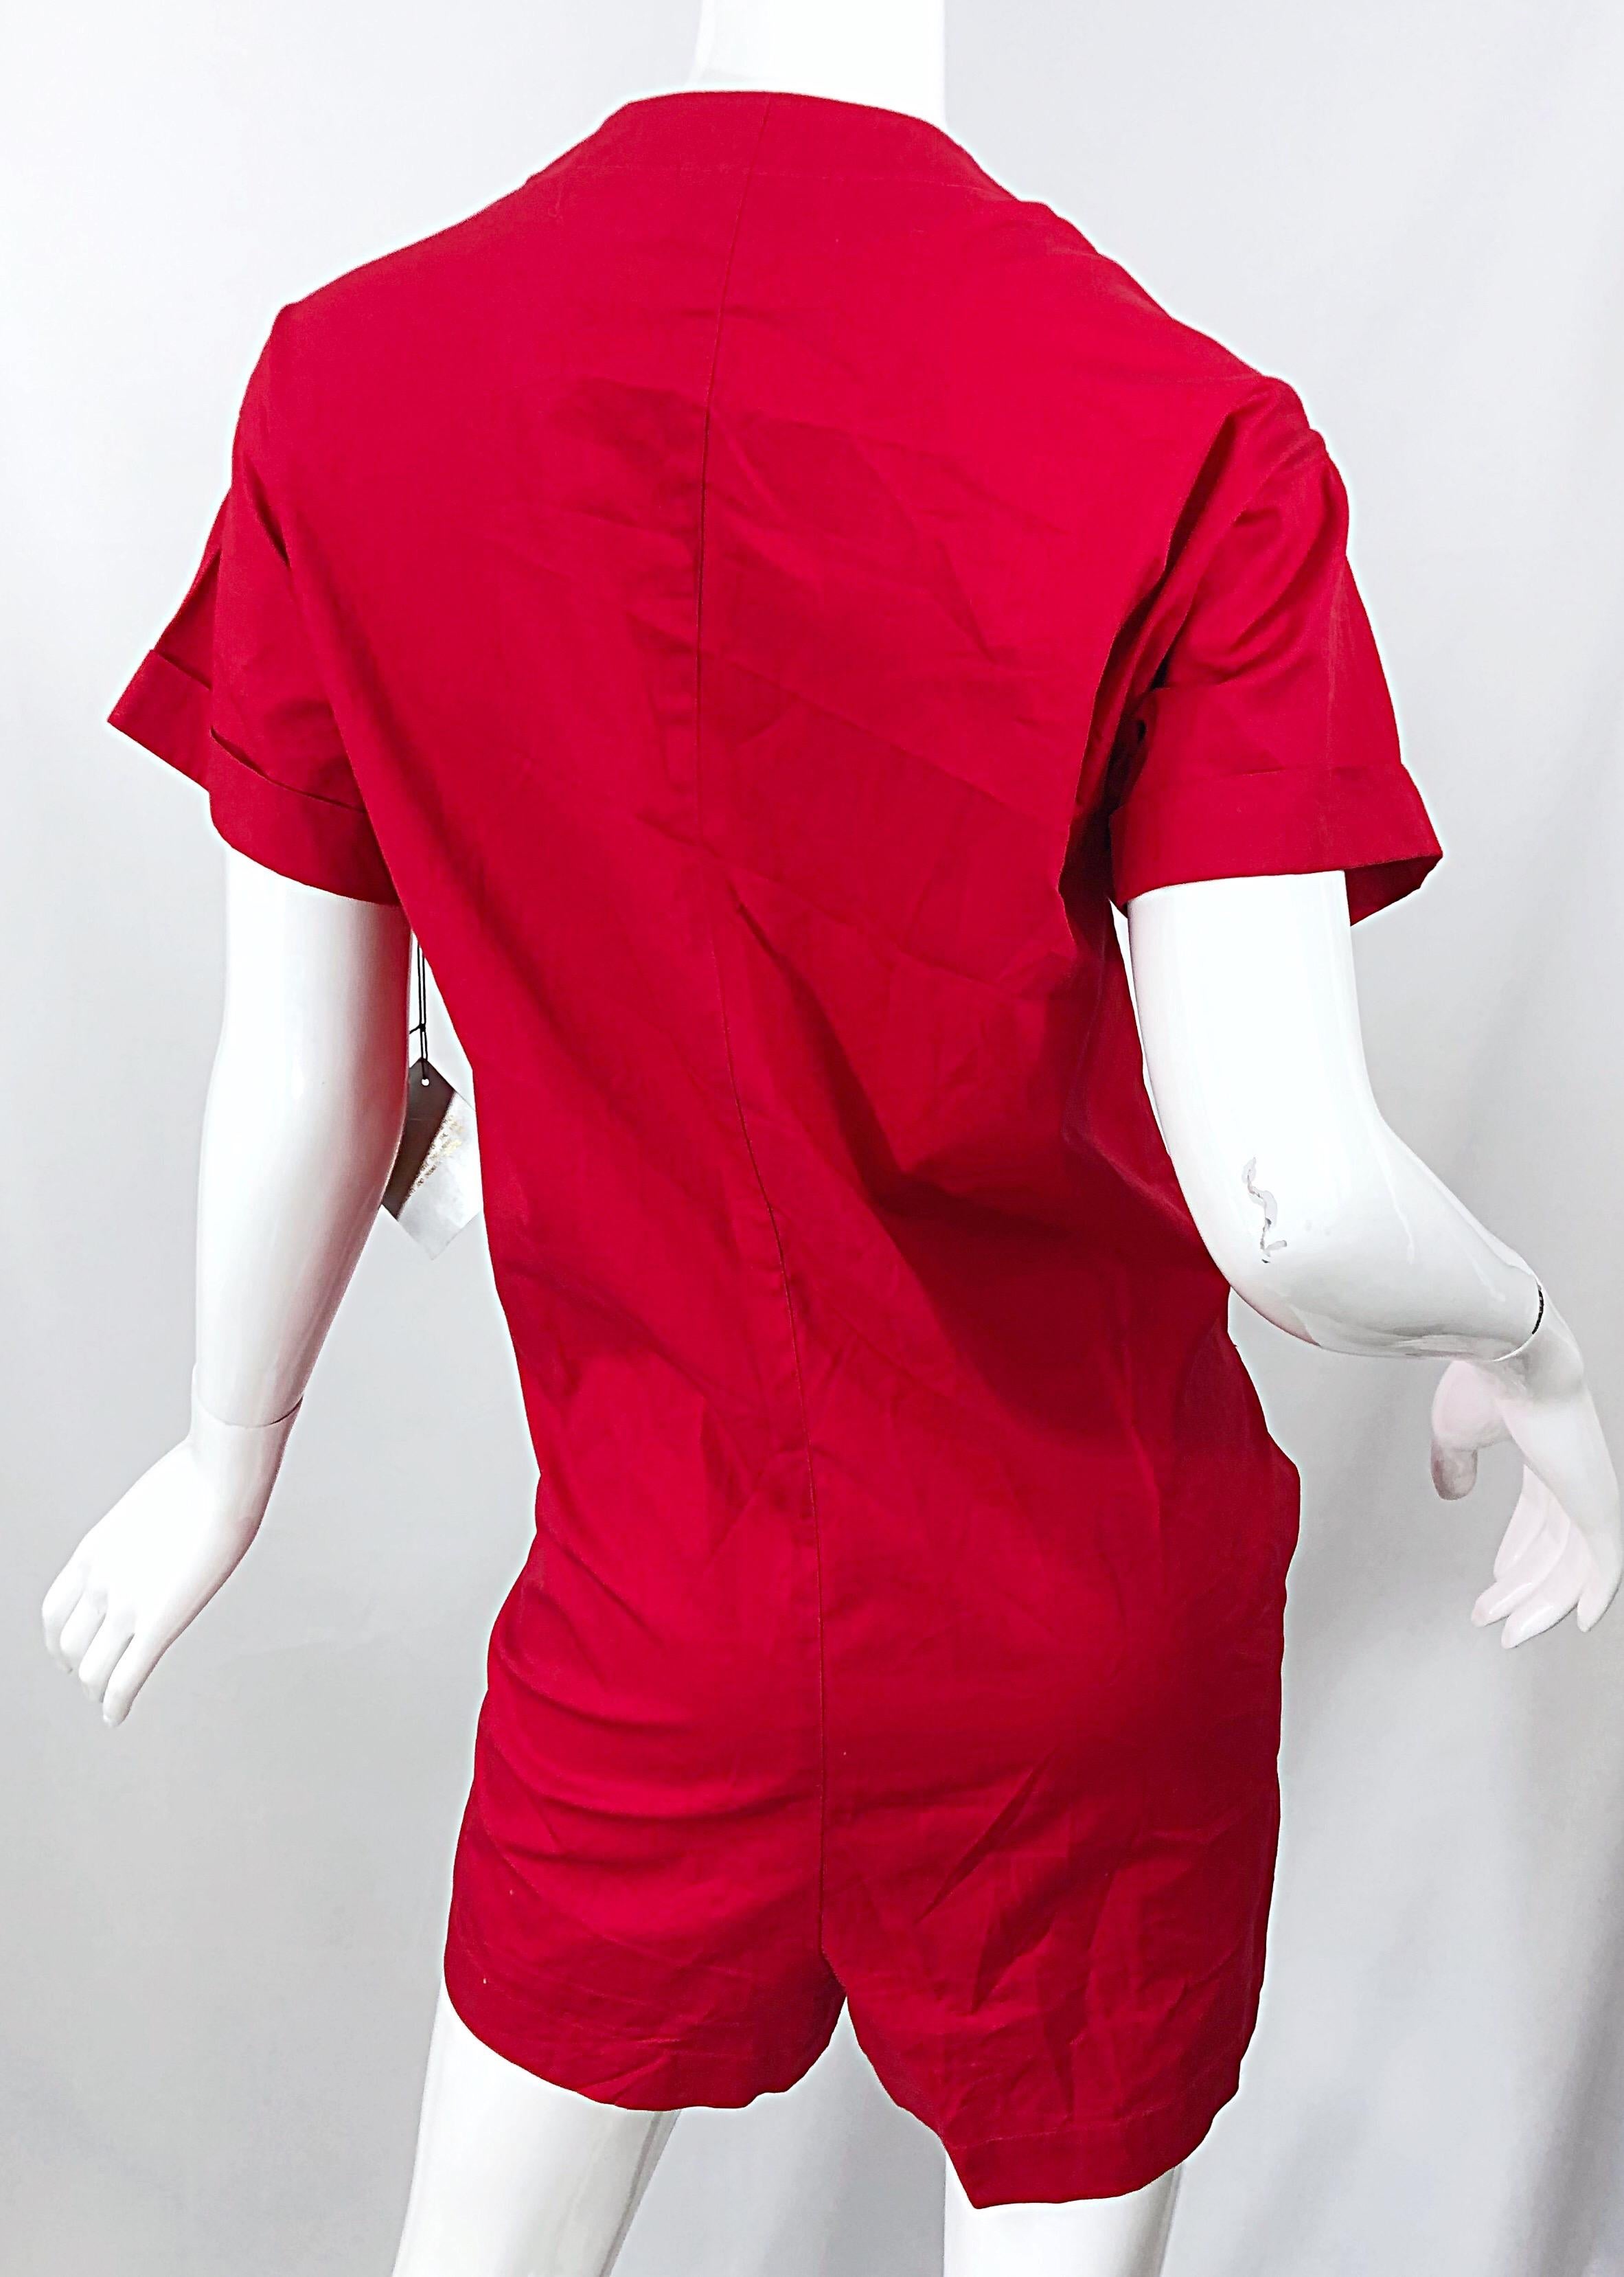 NWT Vintage Christian Dior Romper Size 14 Lipstick Red Cotton One Piece Jumpsuit For Sale 4